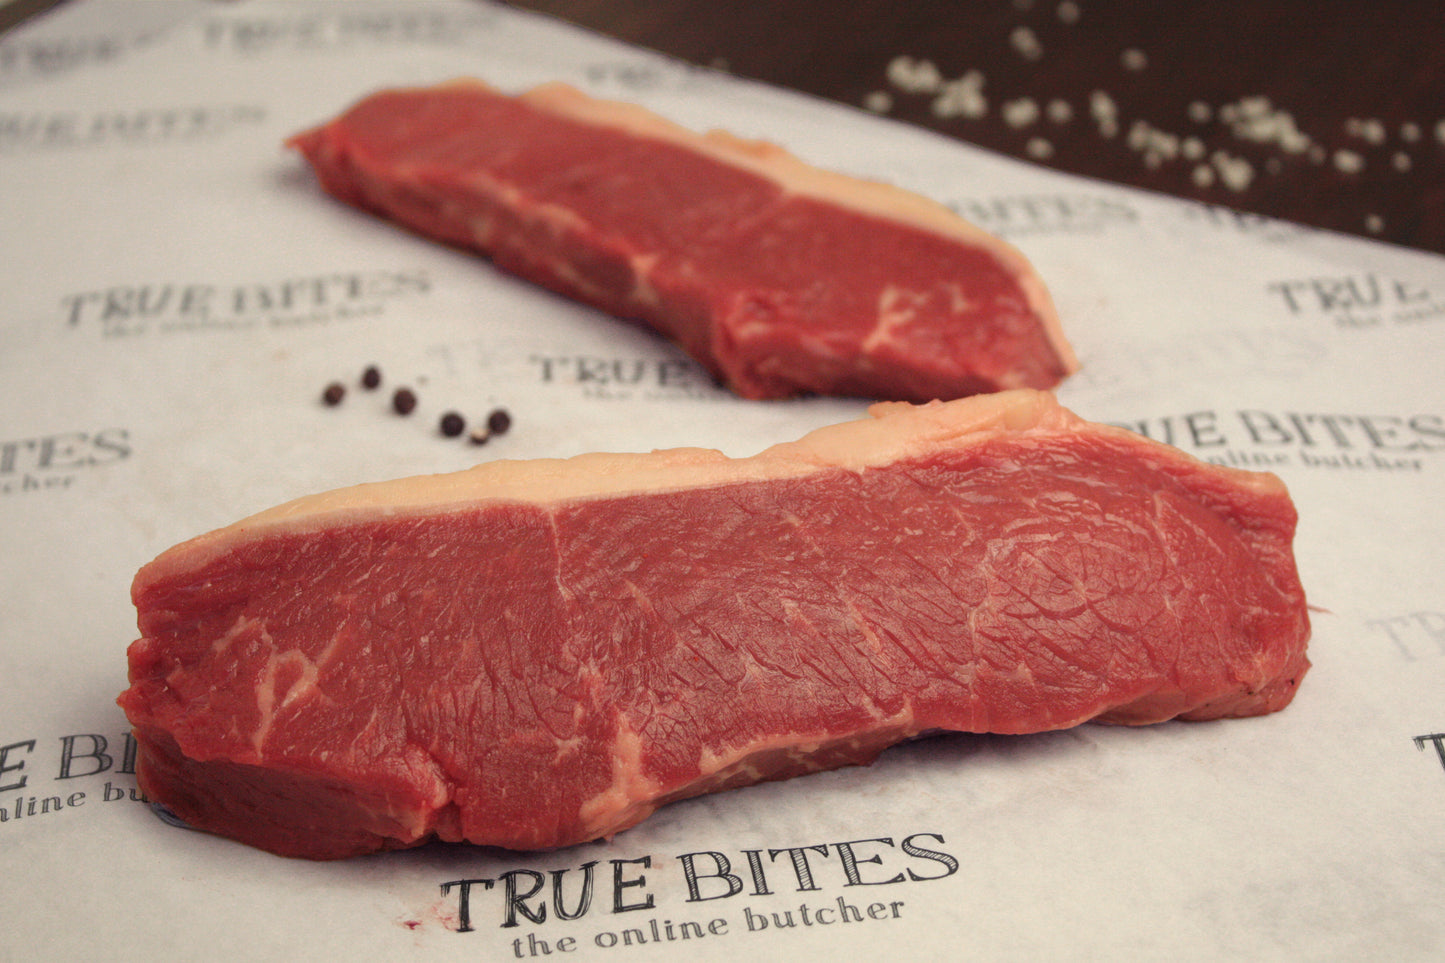 2 beef sirloin steaks pictured on true bites branded greaseproof paper